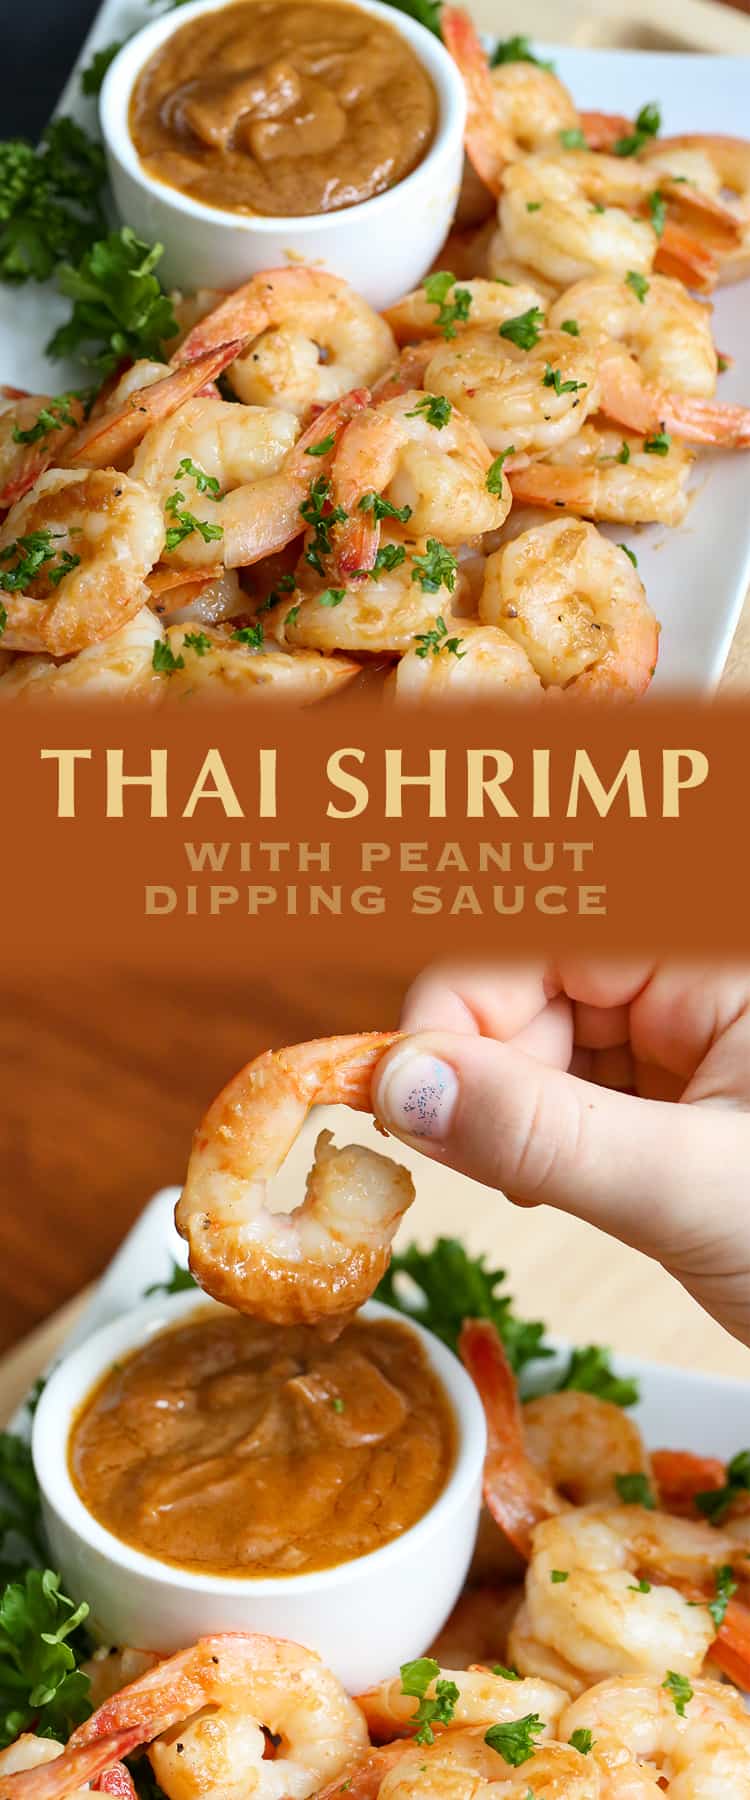 Thai Shrimp with Peanut Dipping Sauce recipe, a few simple ingredients makes this shrimp and dipping sauce enjoyed alone or in stir-fry